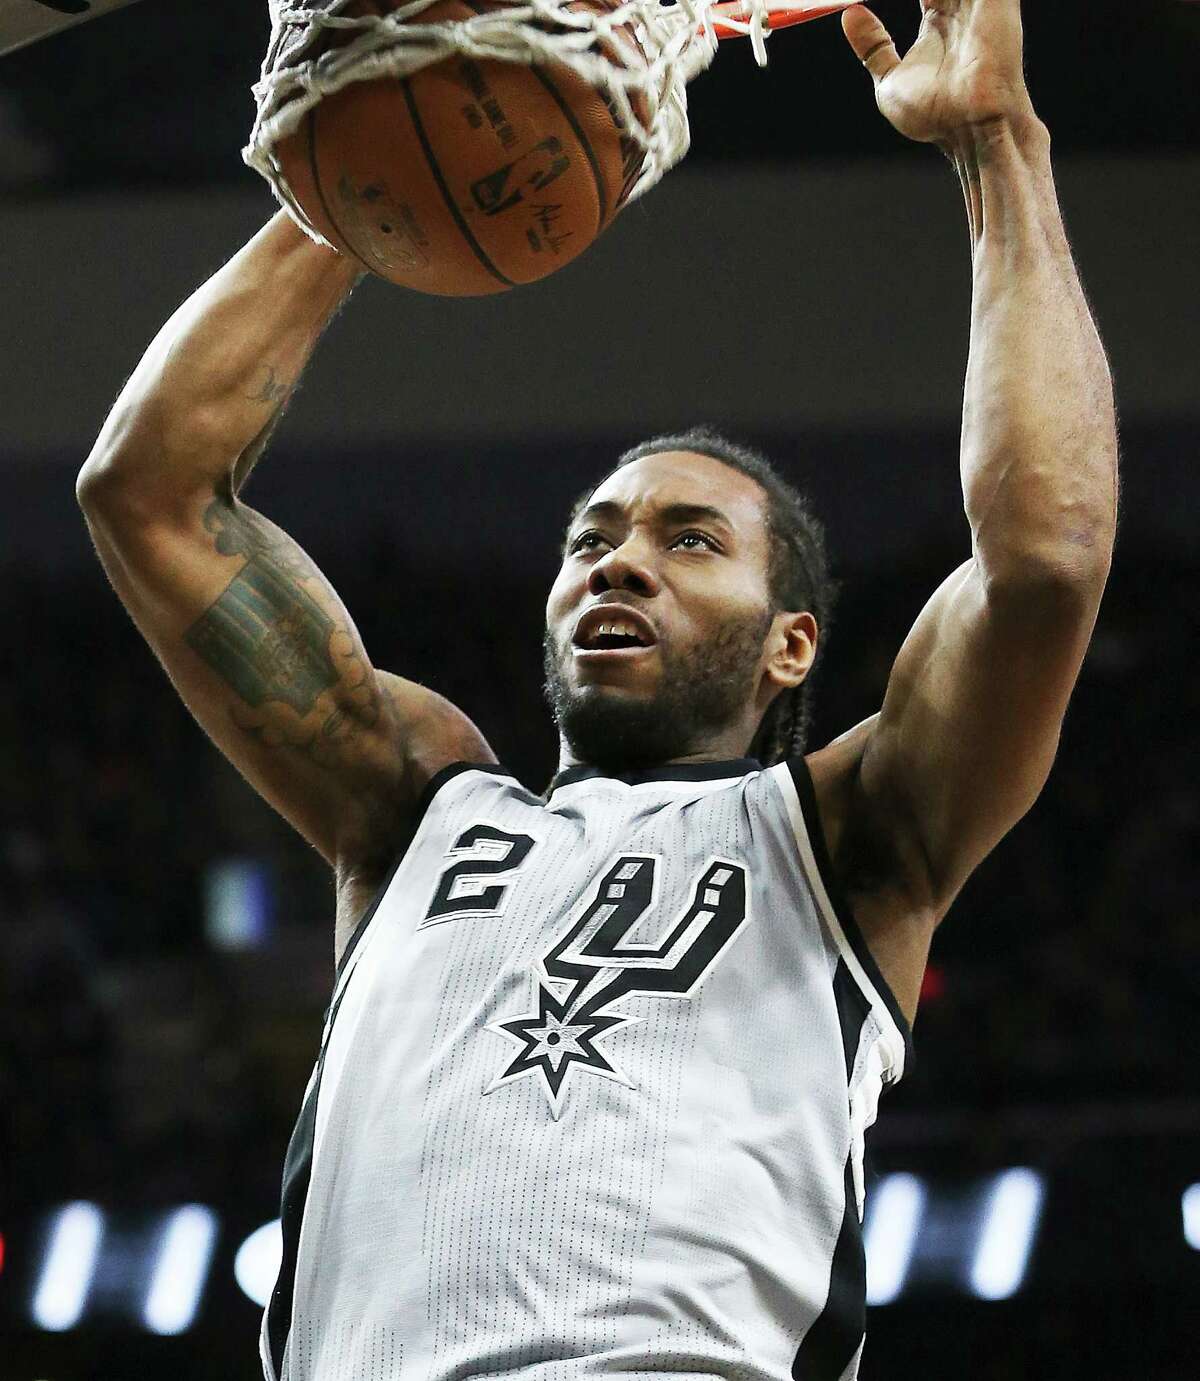 Kawhi Leonard gets a jam as the Spurs host the Rockets at the AT&T Center on January 2, 2016.